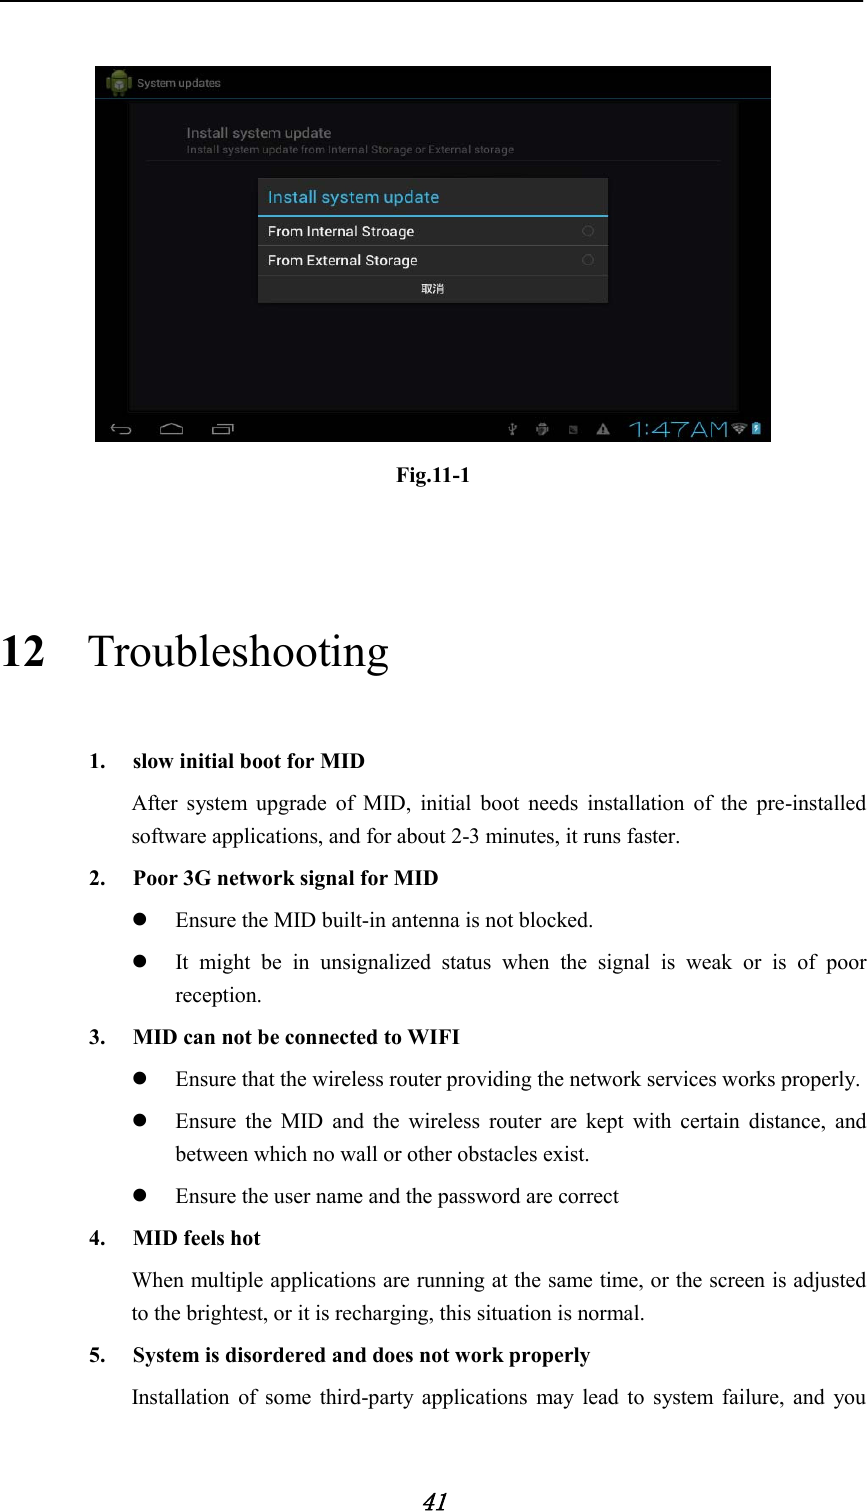            41   Fig.11-1  12 Troubleshooting 1. slow initial boot for MID After system upgrade of MID, initial boot needs installation of the pre-installed software applications, and for about 2-3 minutes, it runs faster. 2. Poor 3G network signal for MID    Ensure the MID built-in antenna is not blocked.  It might be in unsignalized status when the signal is weak or is of poor reception. 3. MID can not be connected to WIFI  Ensure that the wireless router providing the network services works properly.  Ensure the MID and the wireless router are kept with certain distance, and between which no wall or other obstacles exist.  Ensure the user name and the password are correct 4. MID feels hot When multiple applications are running at the same time, or the screen is adjusted to the brightest, or it is recharging, this situation is normal. 5. System is disordered and does not work properly Installation of some third-party applications may lead to system failure, and you 